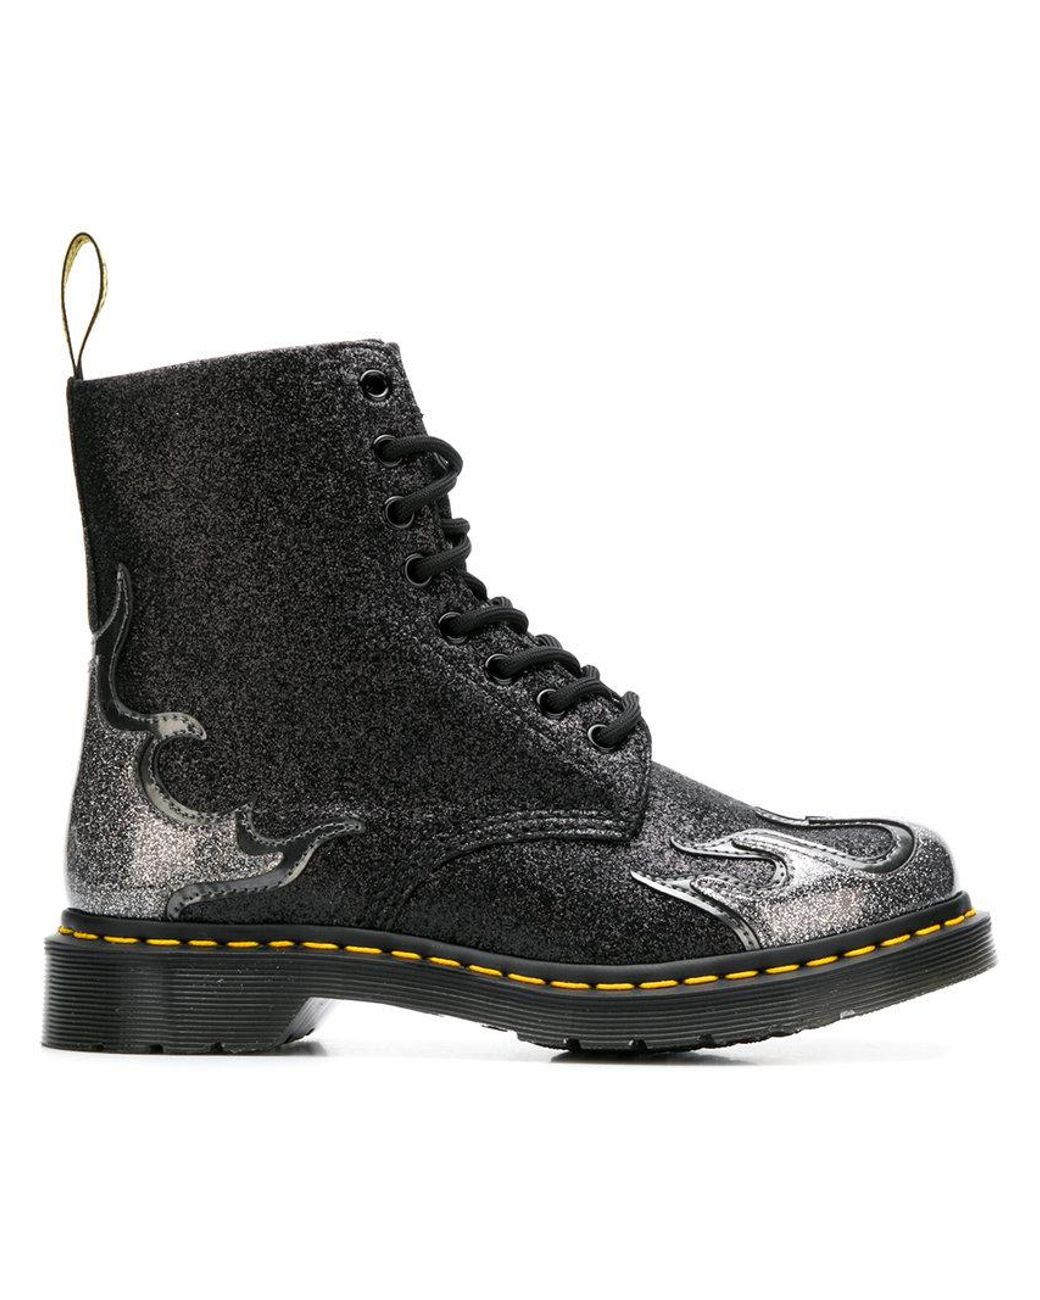 Dr. Martens Near Black Glitter '1460 Pascal Flame' Lace Up Boots